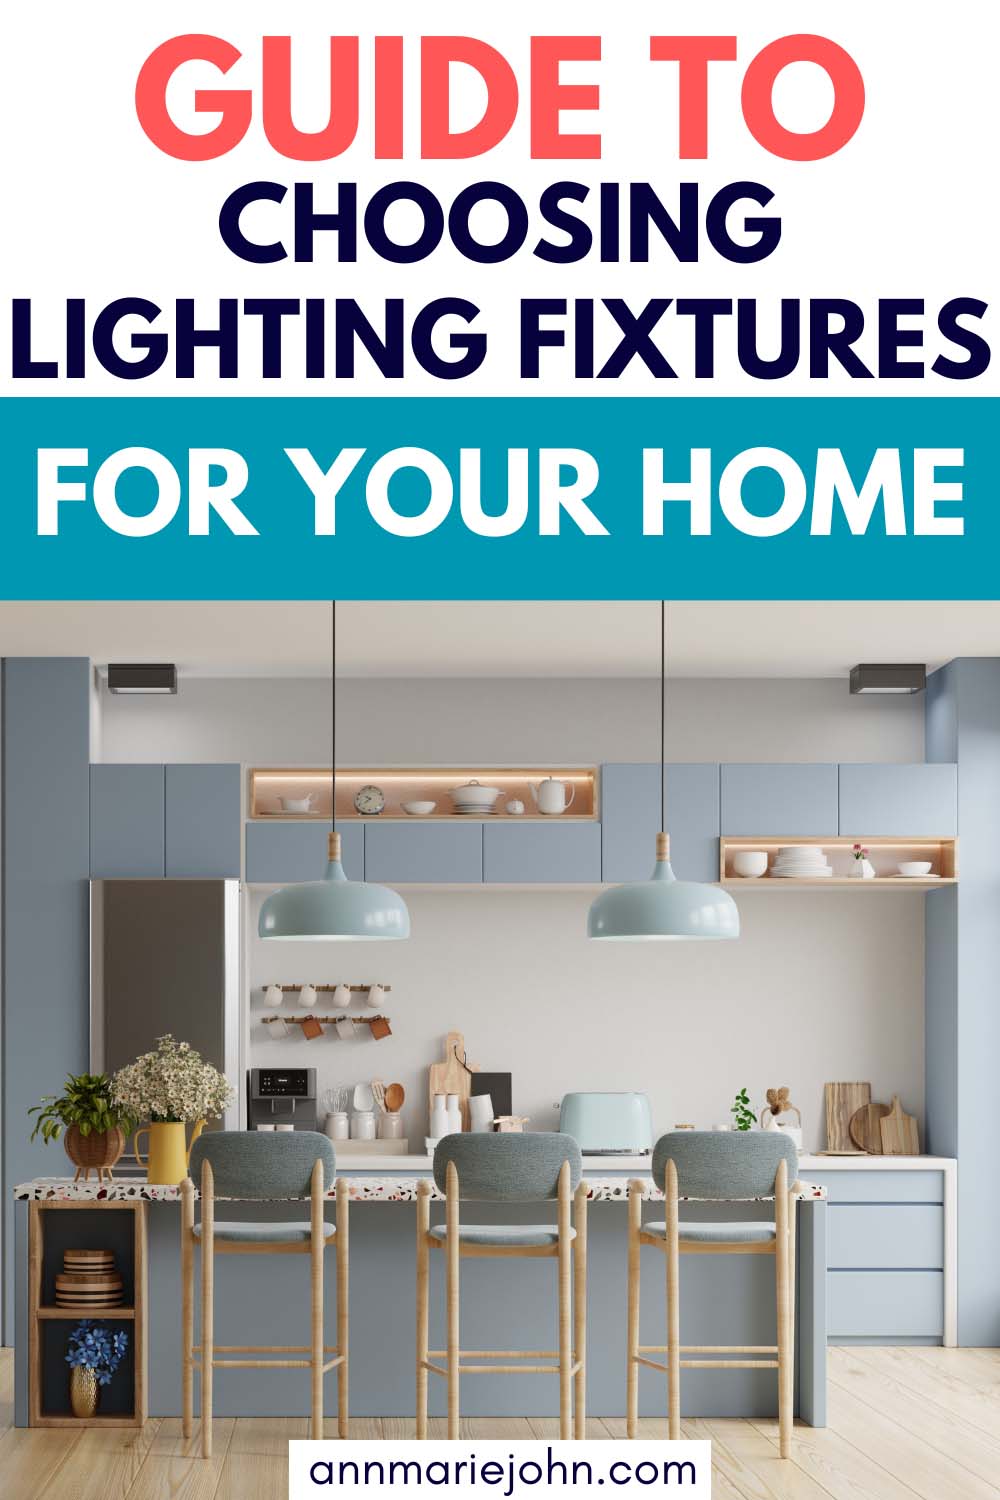 Guide to Choosing Lighting Fixtures for Your Home